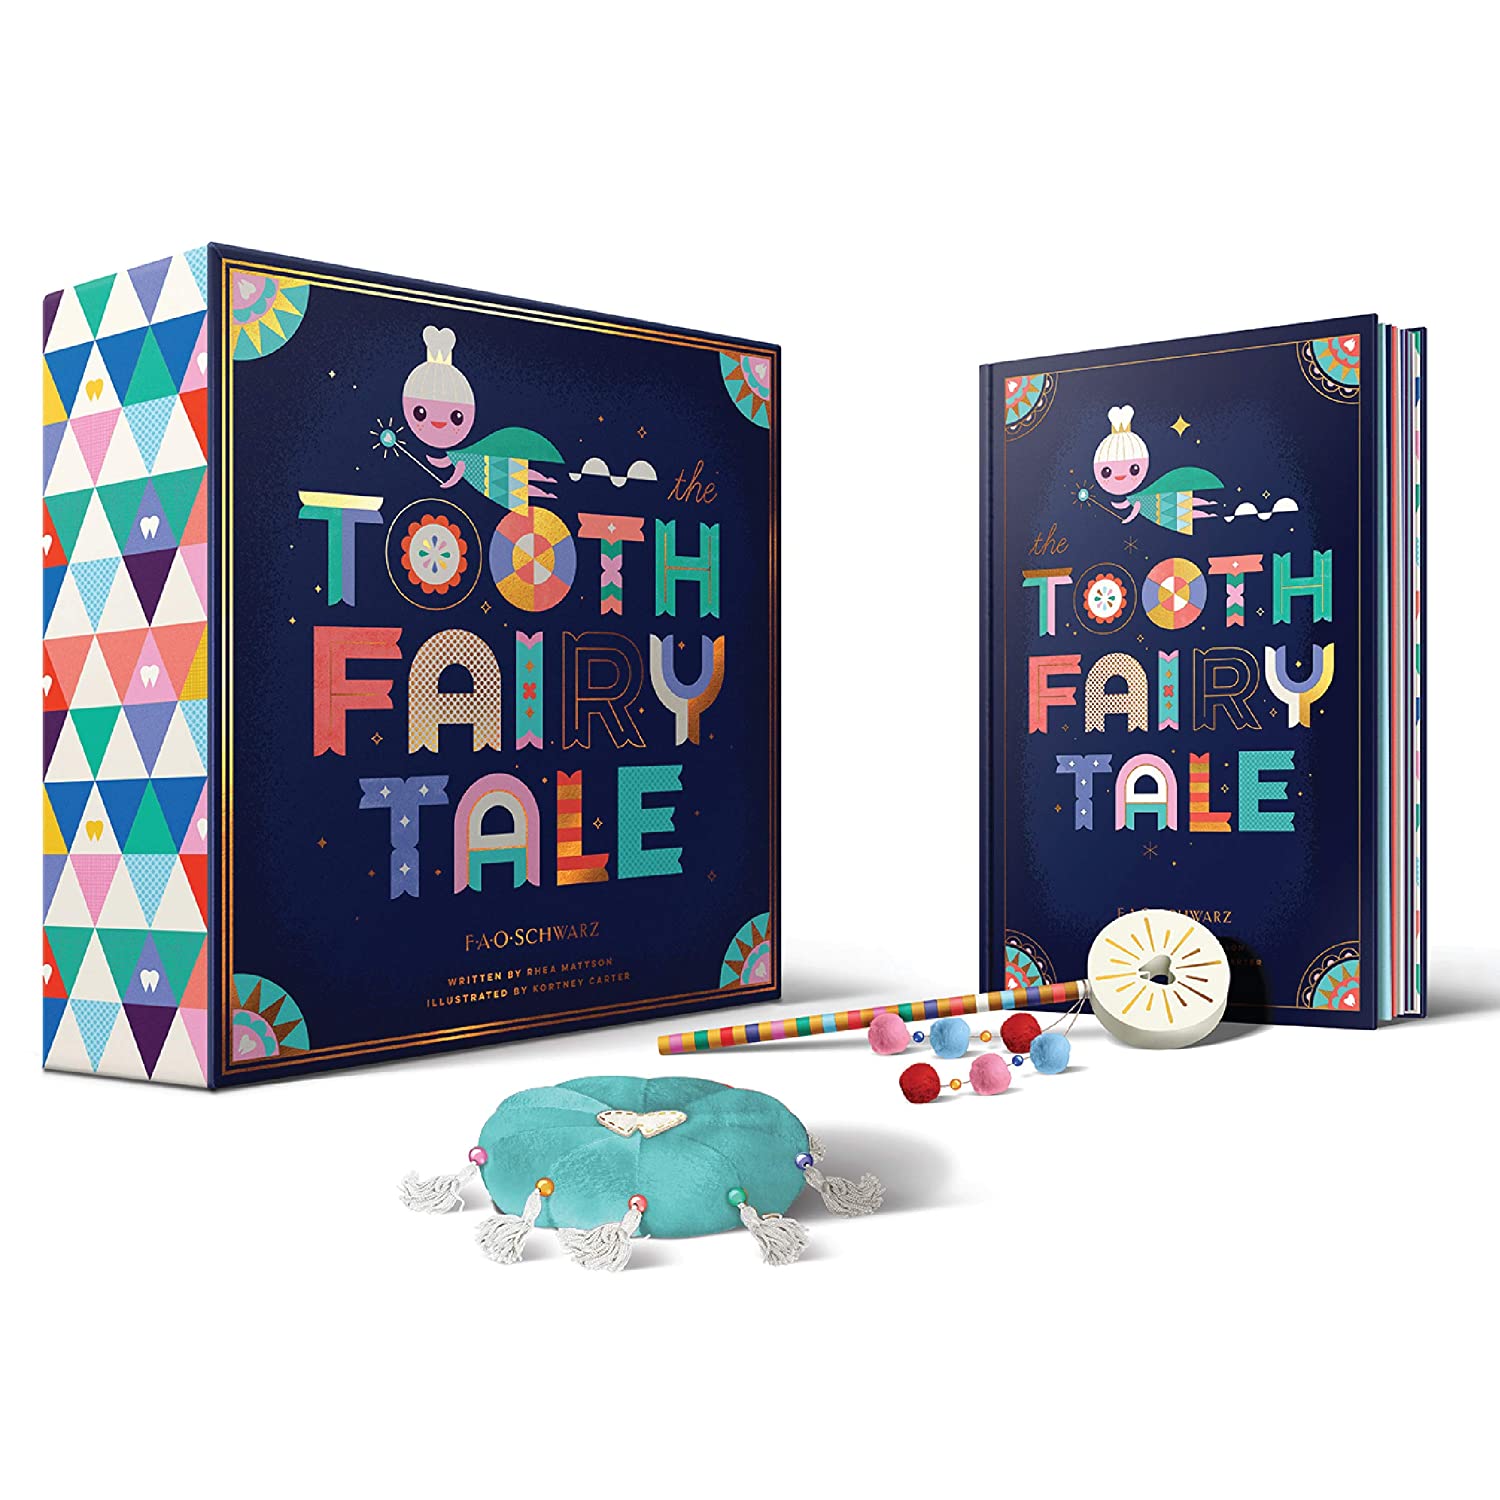 FAO Schwarz Fairy Tale Book and Keepsake Box Includes Tooth Pillow Fairy Wand and Scrapbook First Lost Tooth Diary